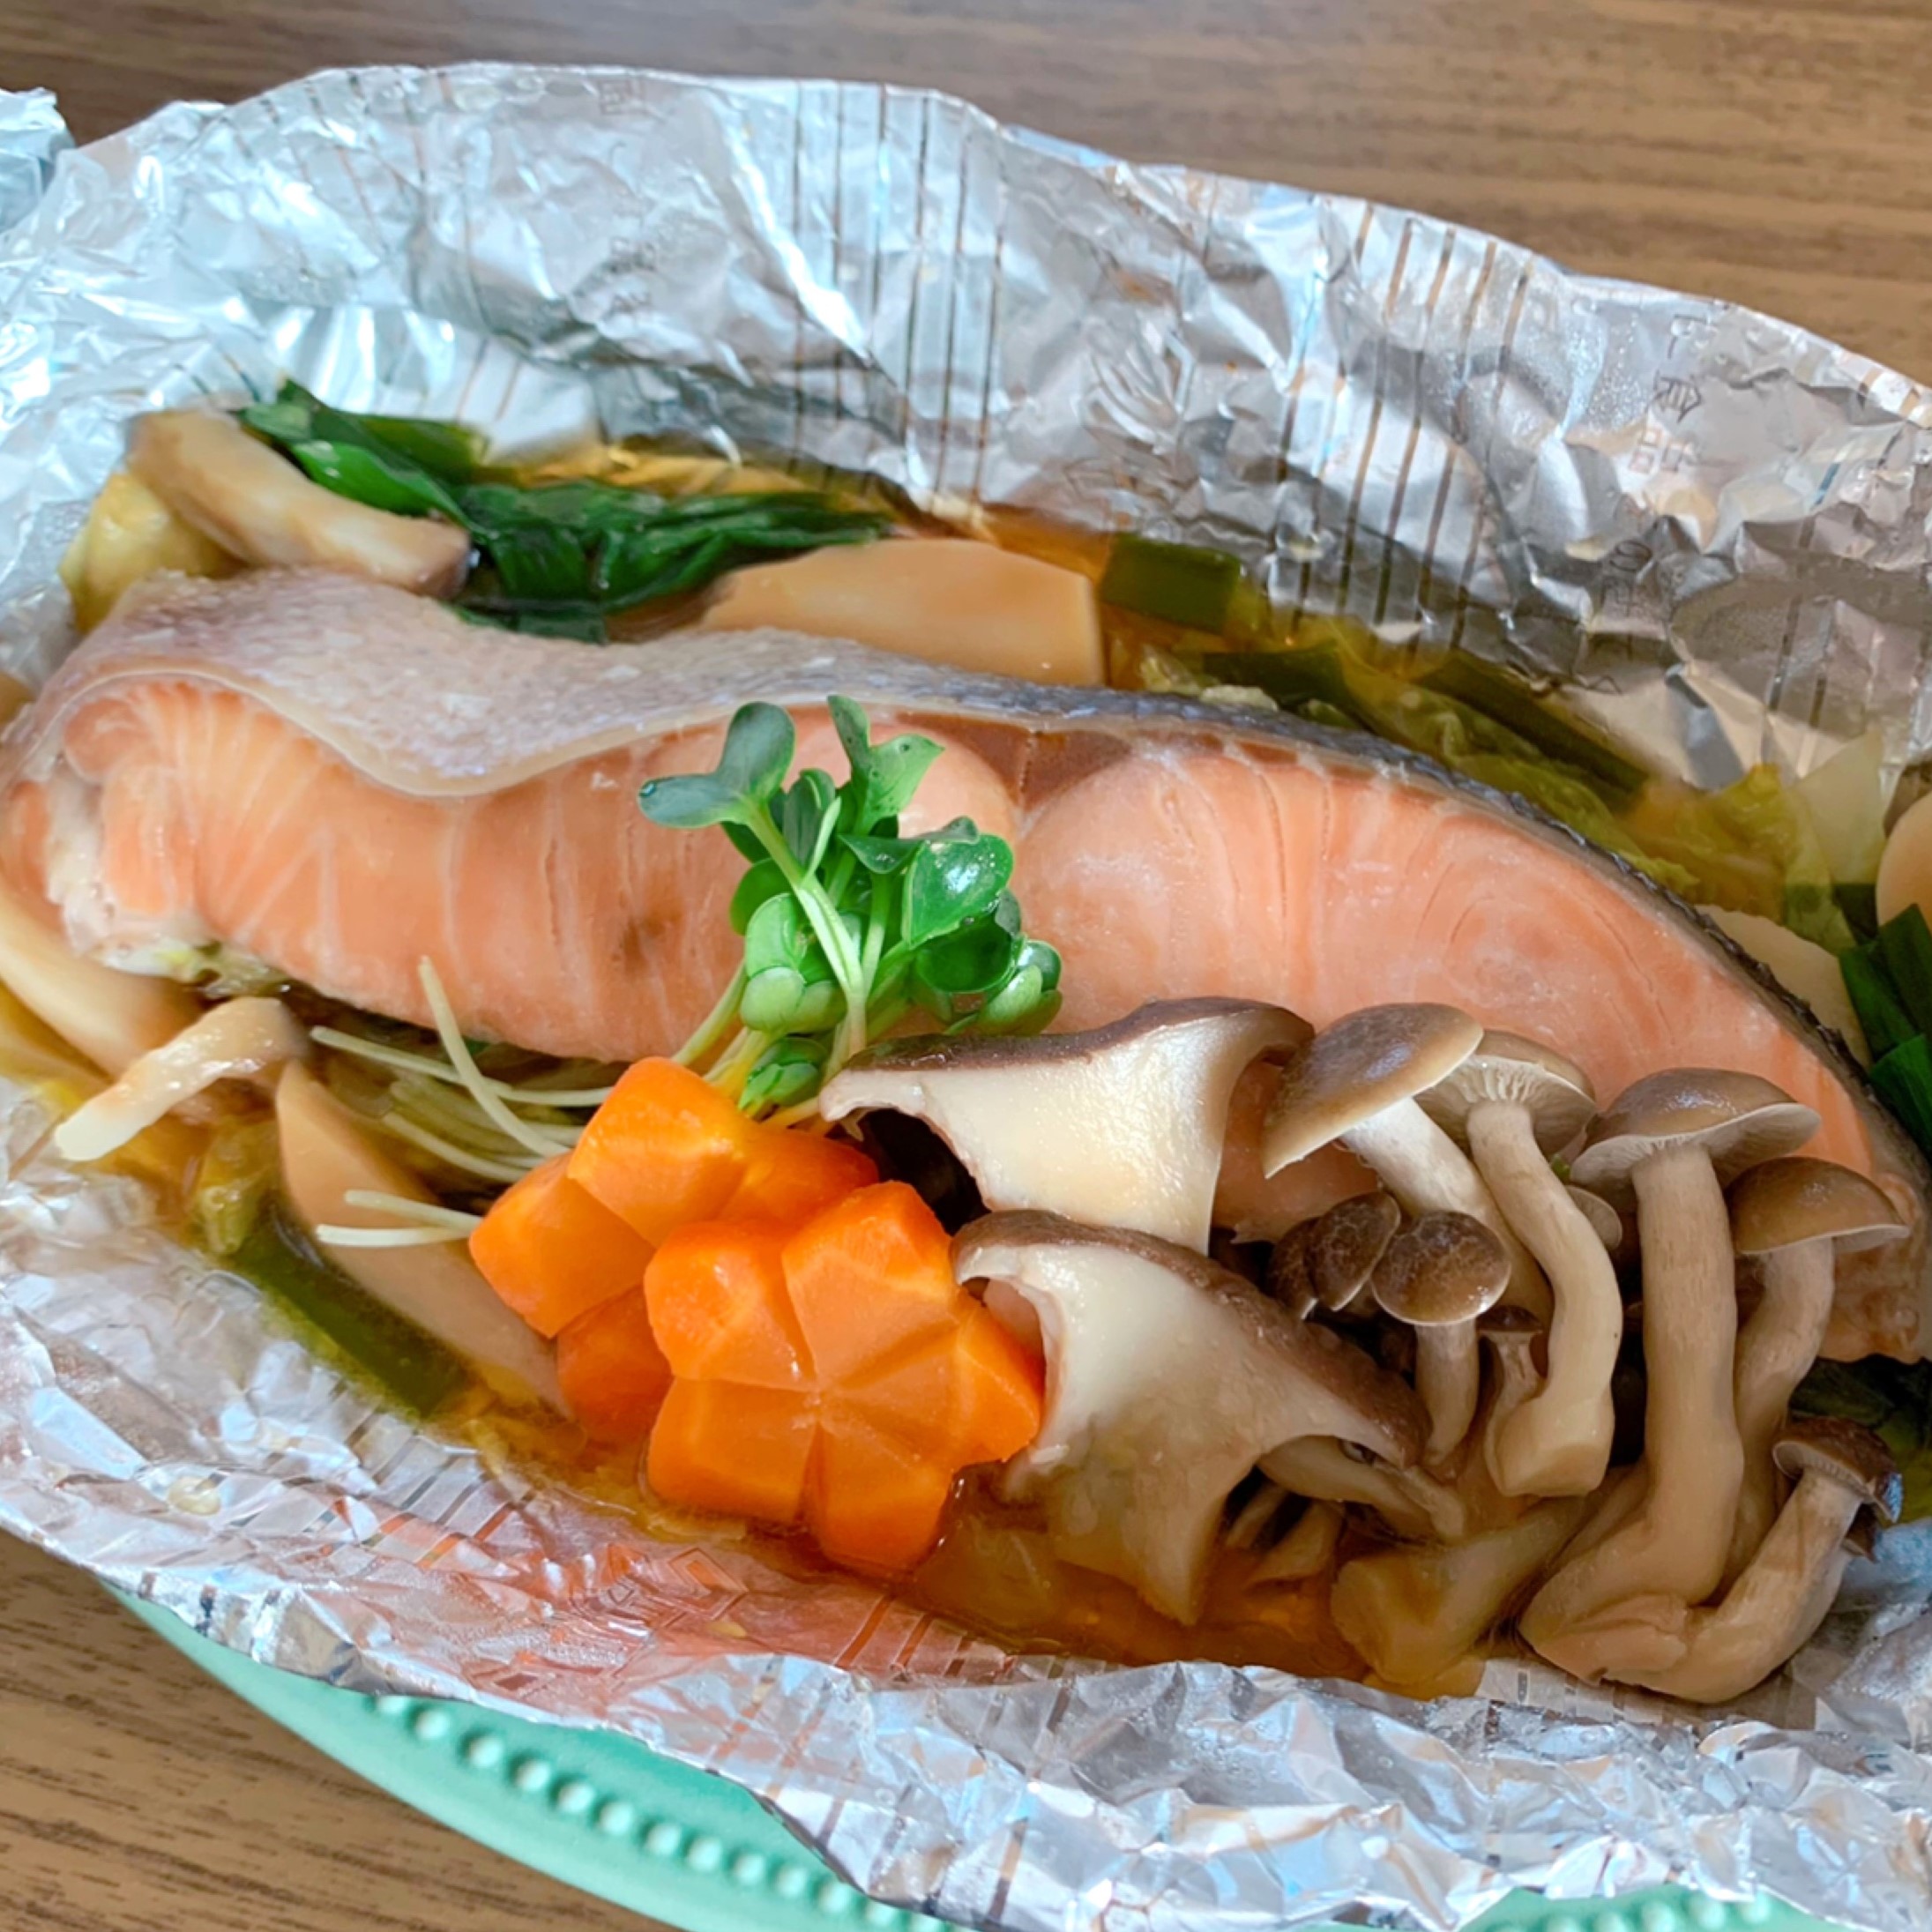 A dish made by wrapping salmon and vegetables in aluminum foil and steaming them.